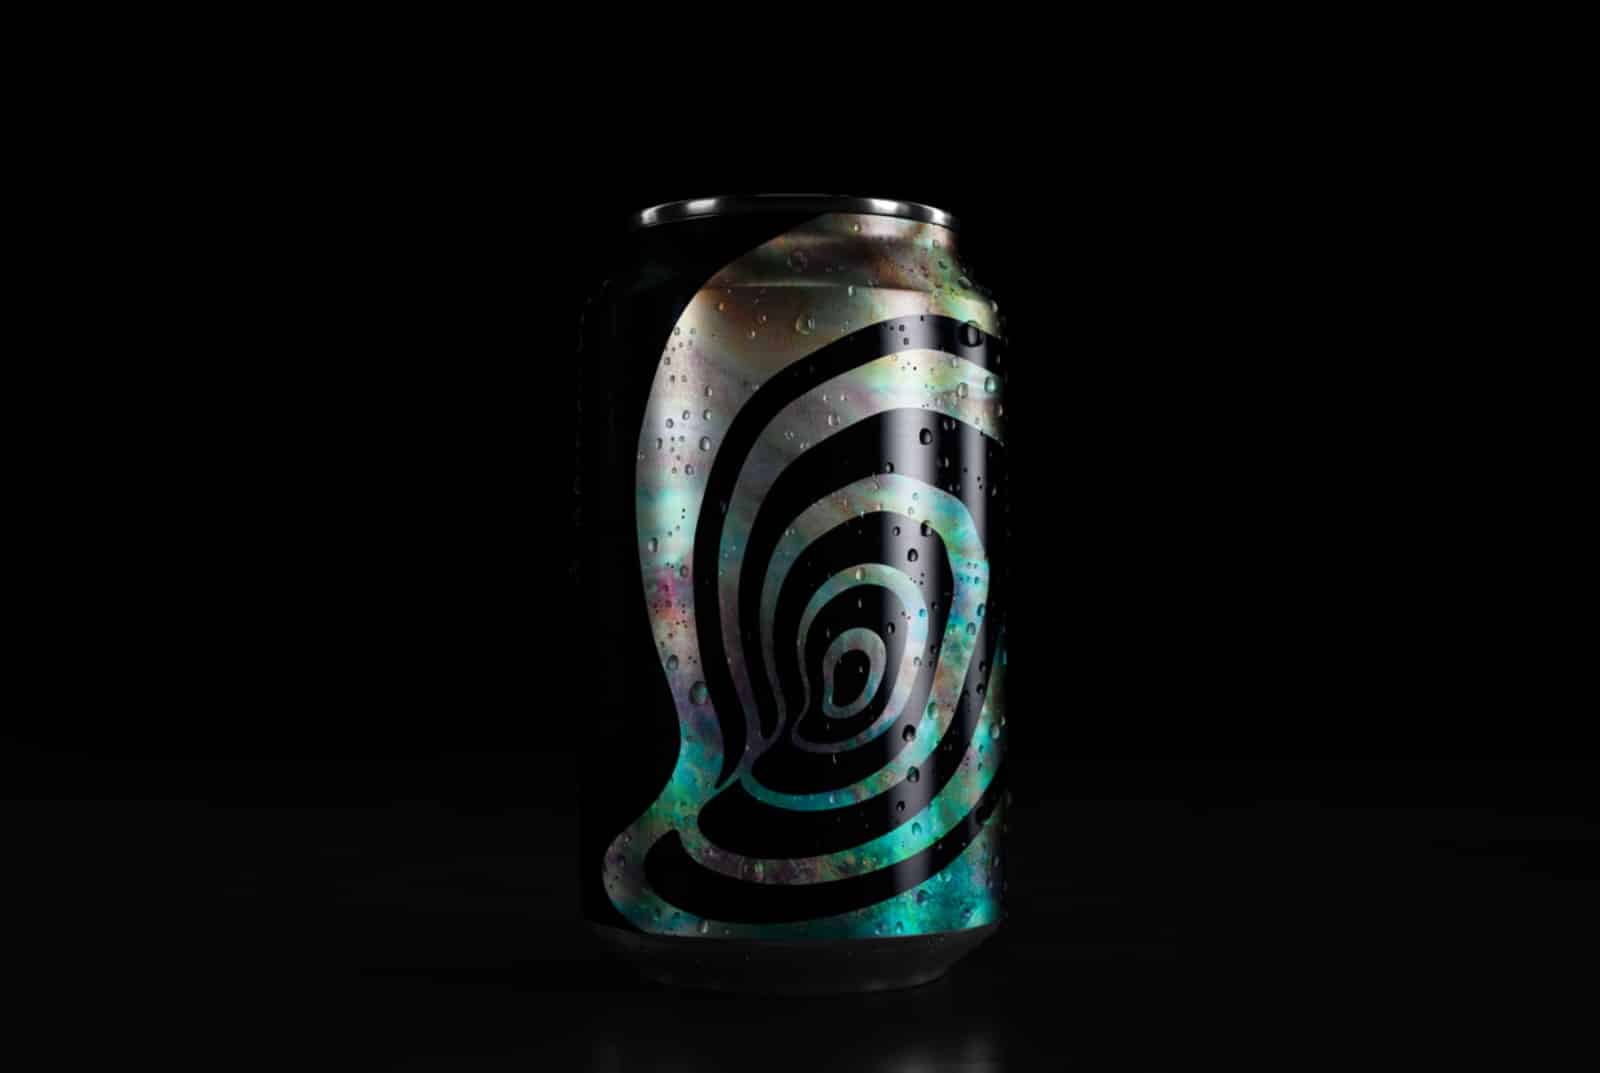 Black can with pearlescent Oyster illustration on and black background. Made for Oyster Stout Launch with unbarred brewery.